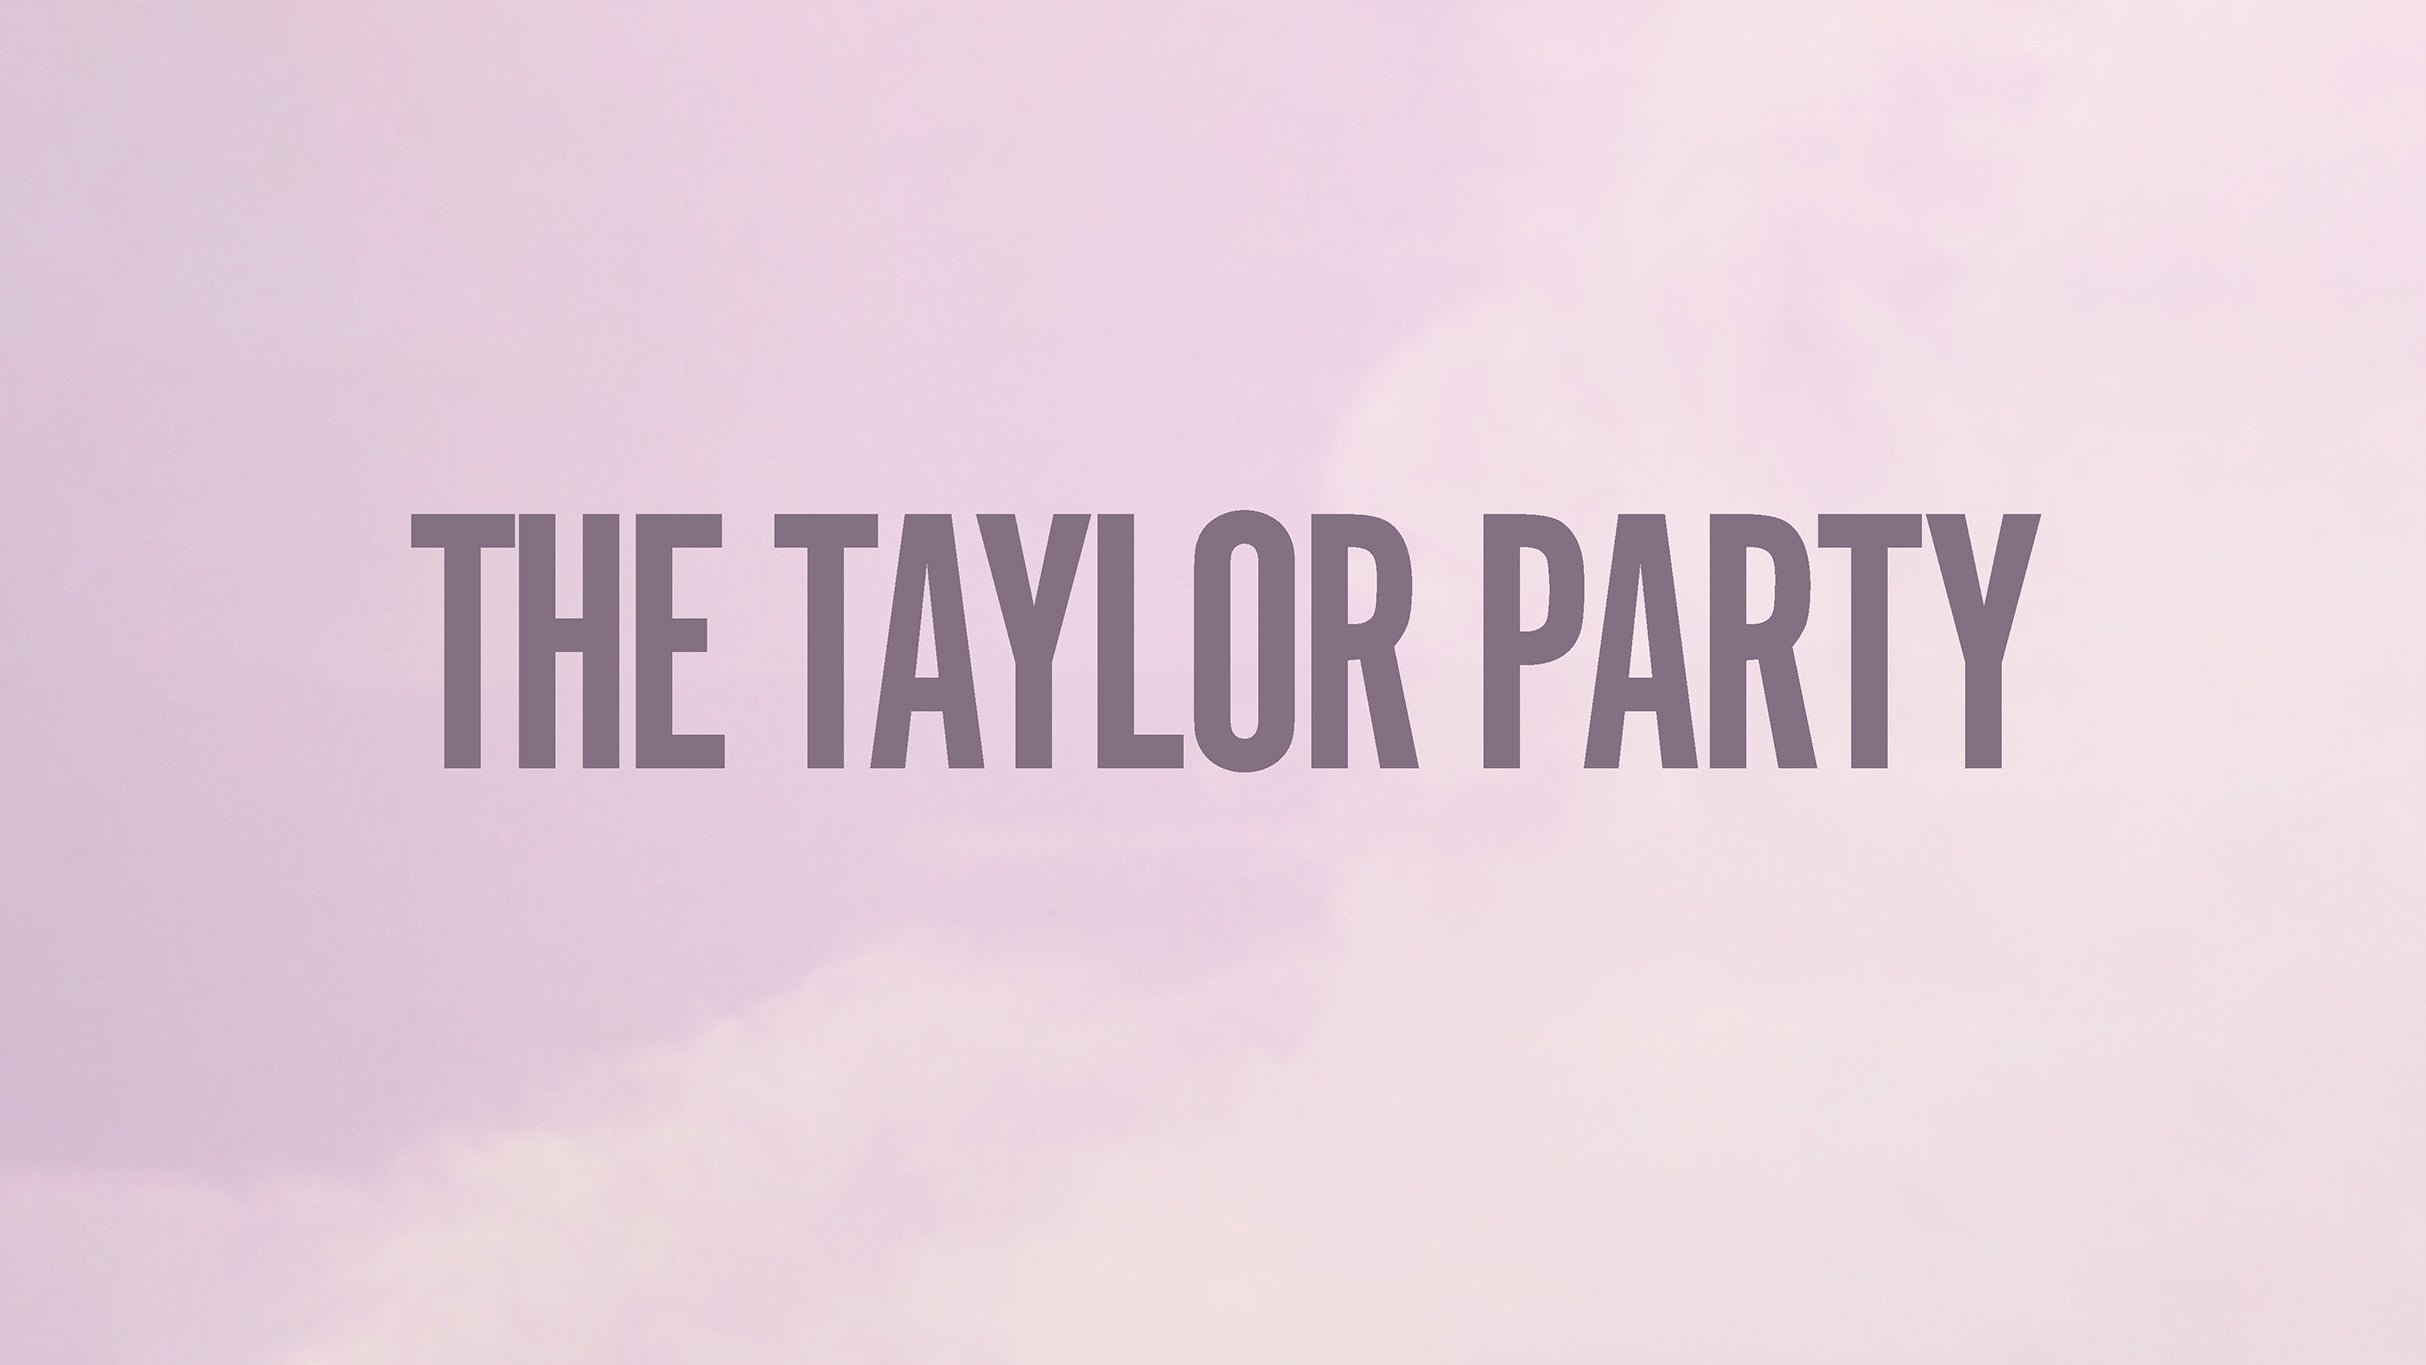 The Taylor Party: The TS Dance Party (+18) pre-sale password